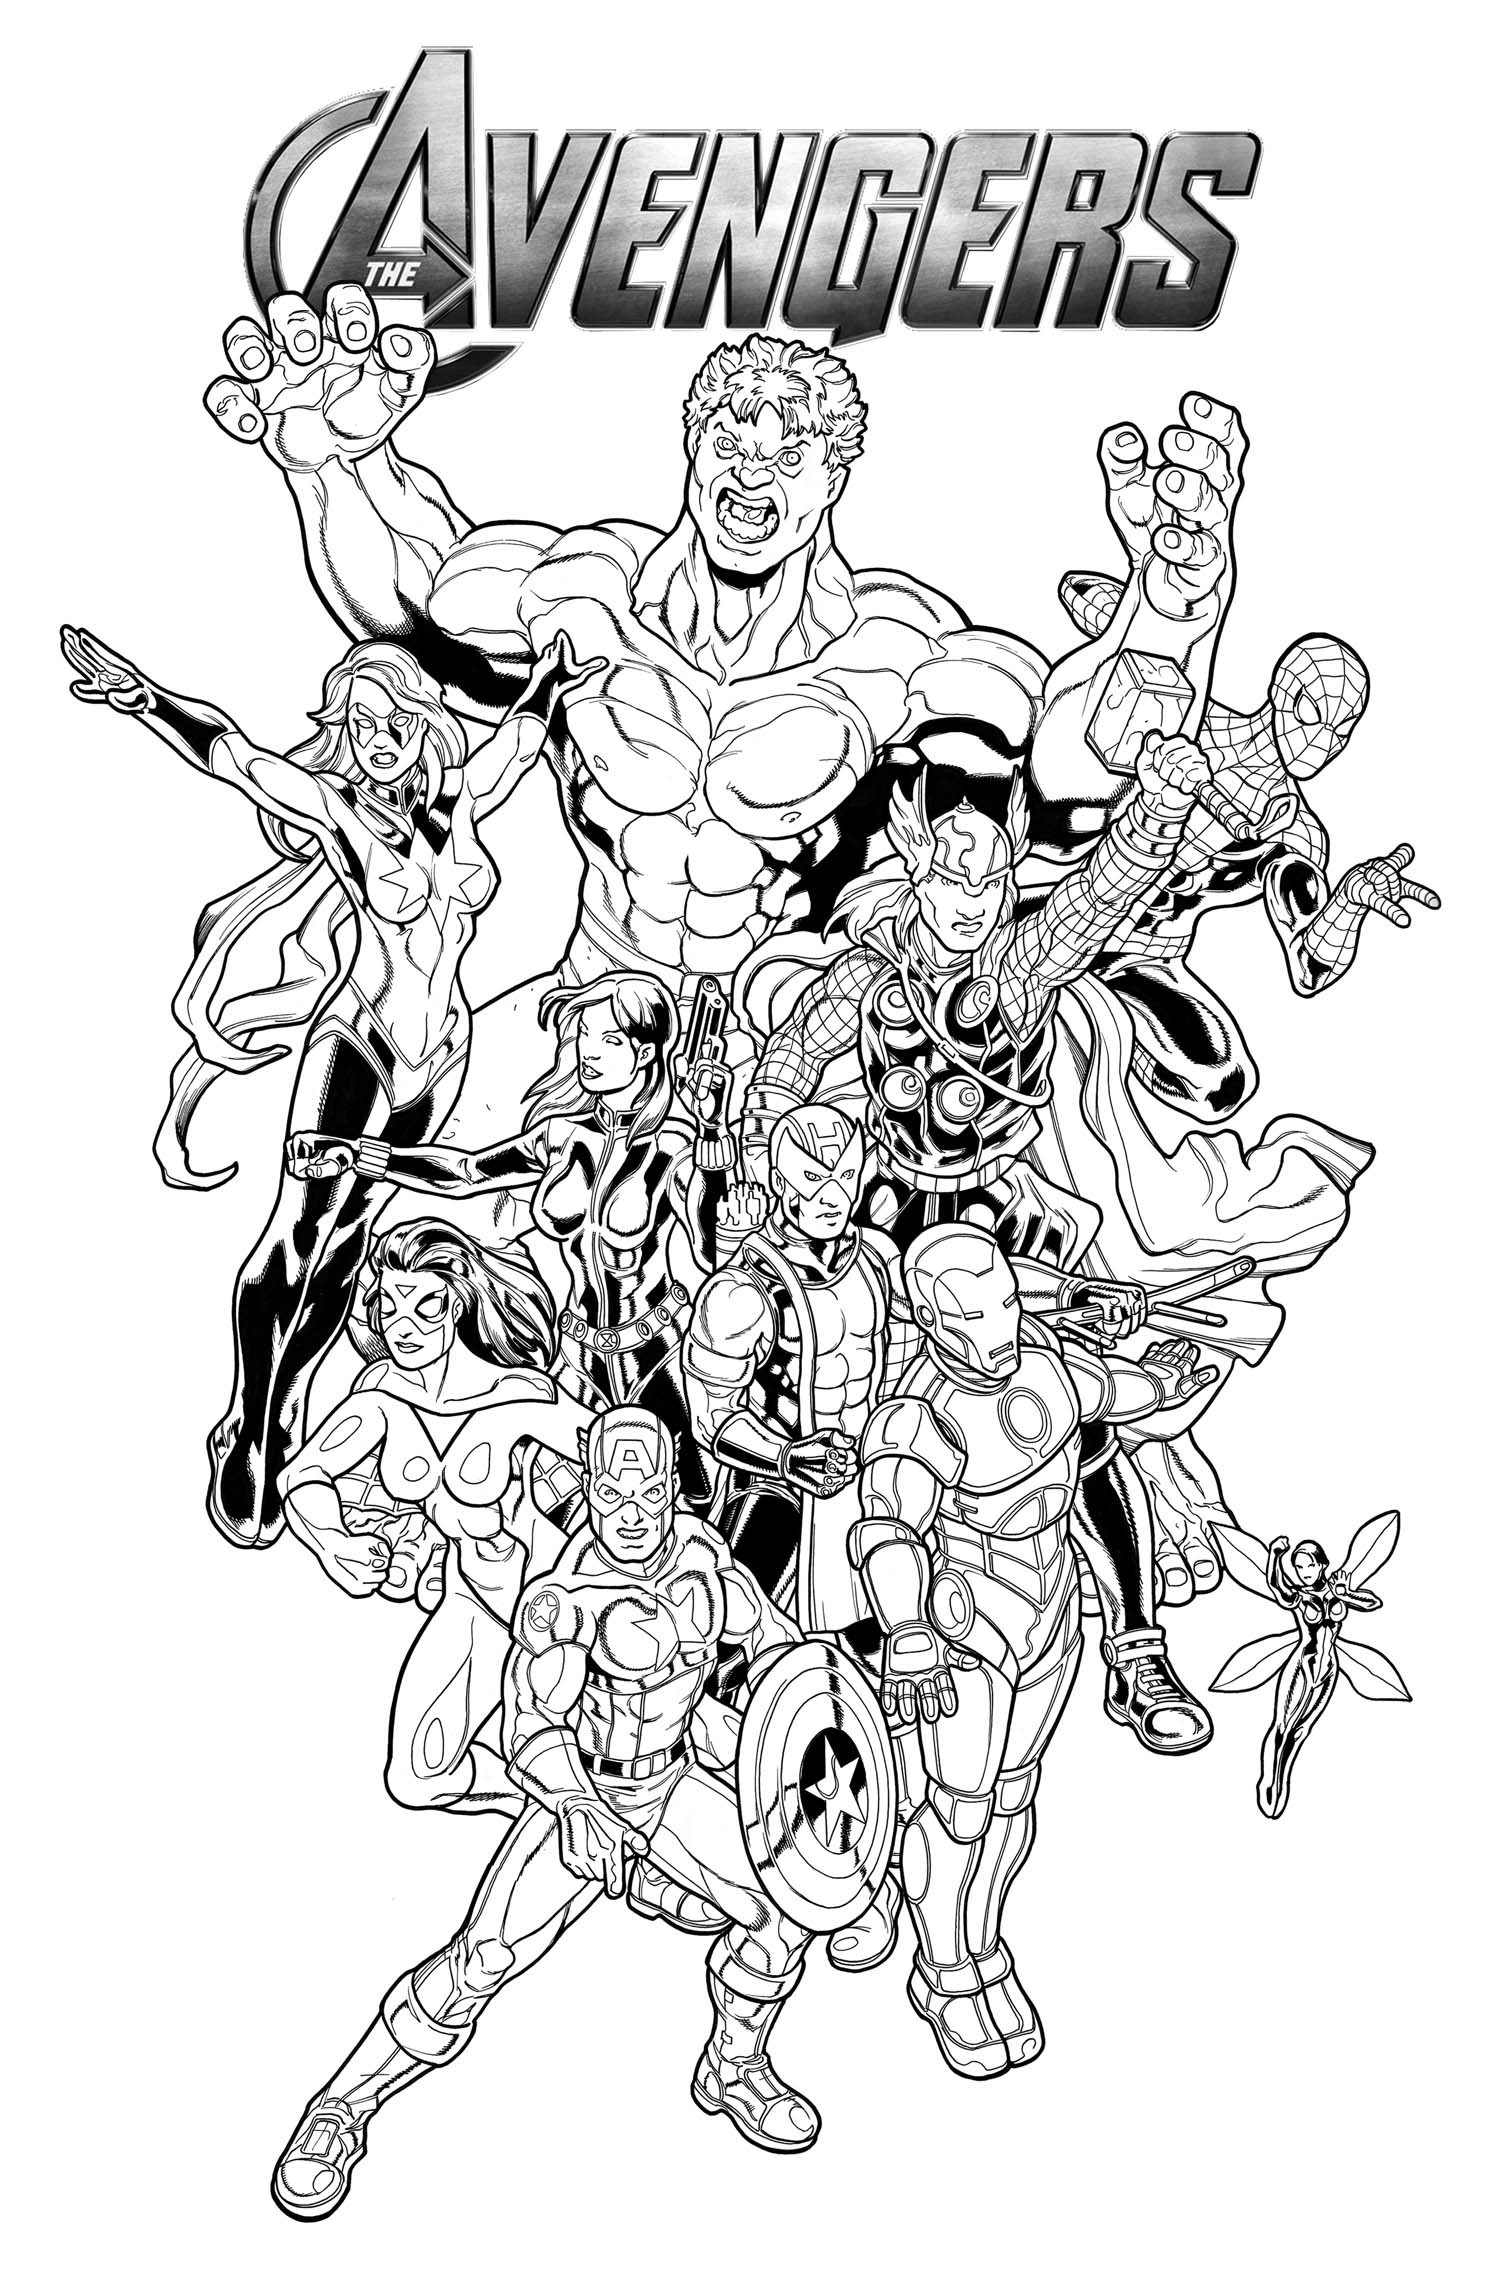 The Avengers Coloring Pages
 Avengers Coloring Pages